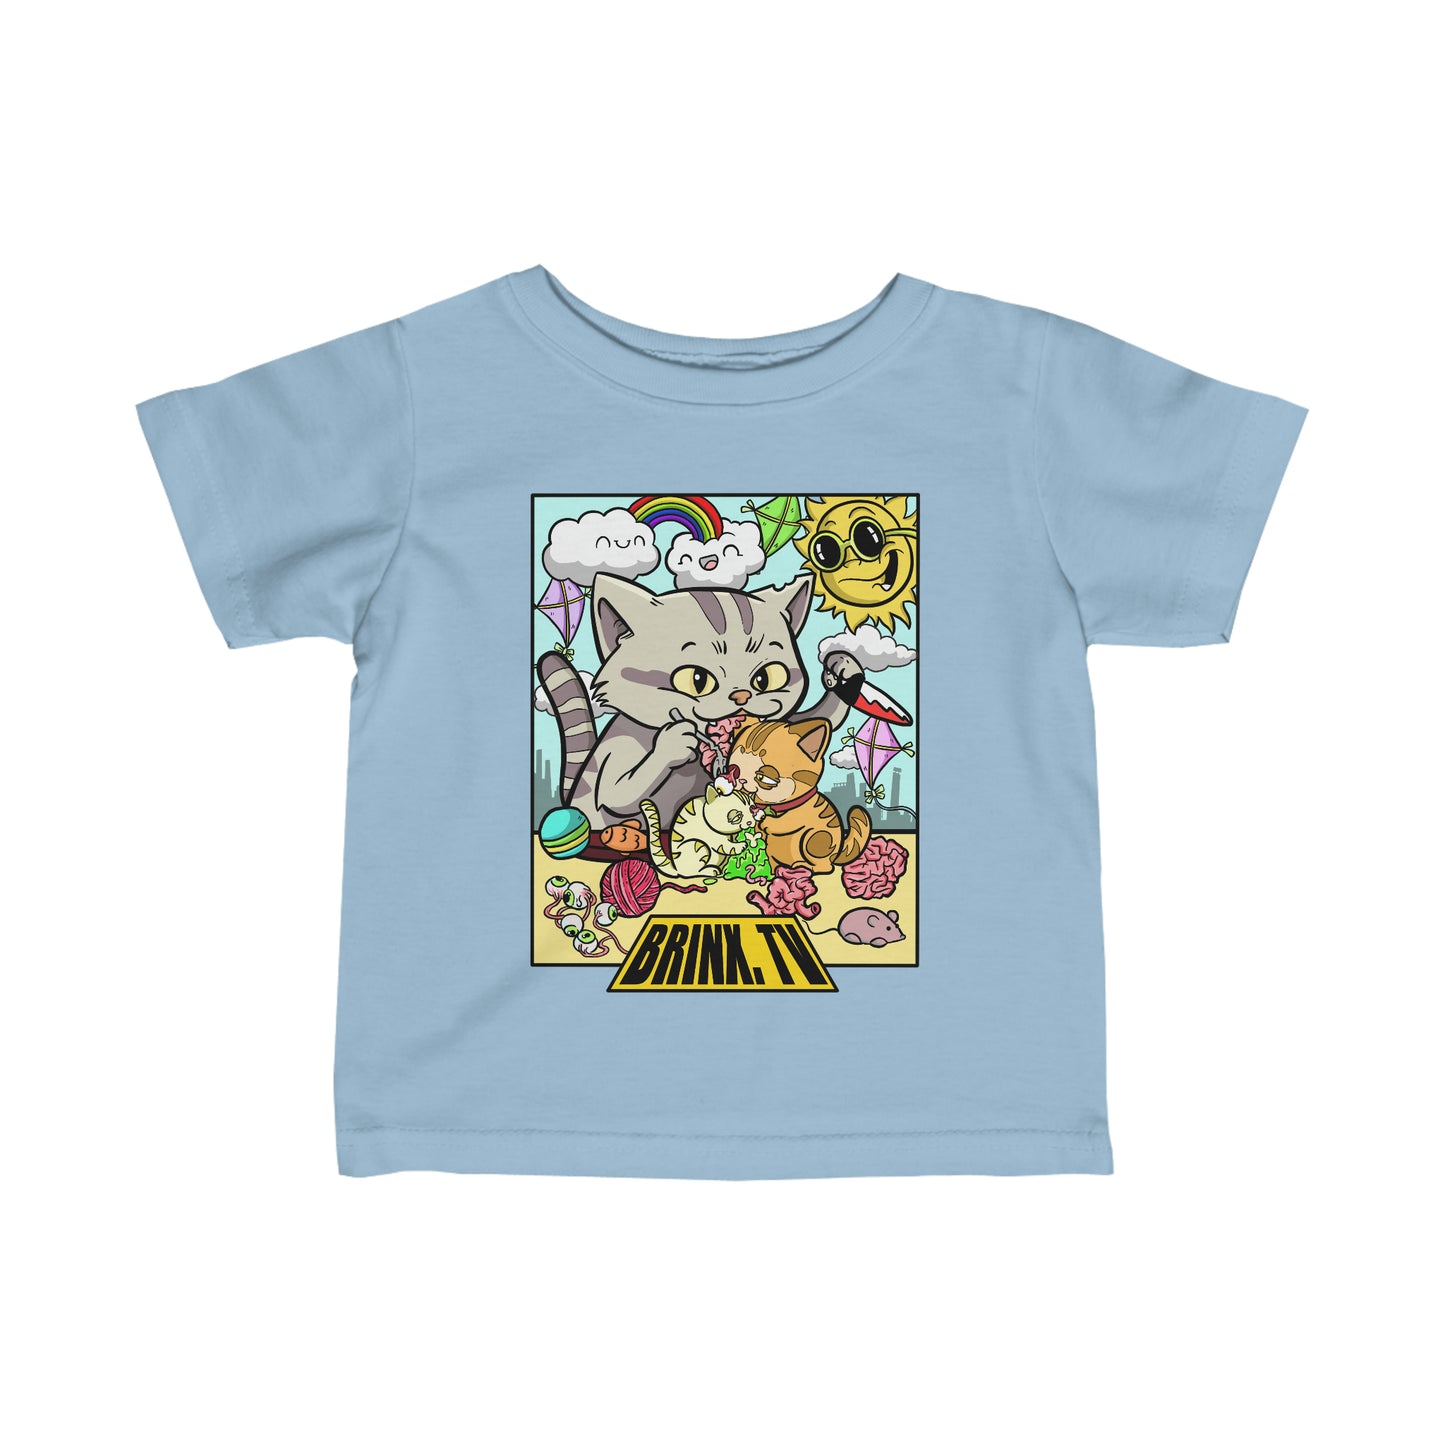 For Kids: Kittens, Kites, Cannibals Tee